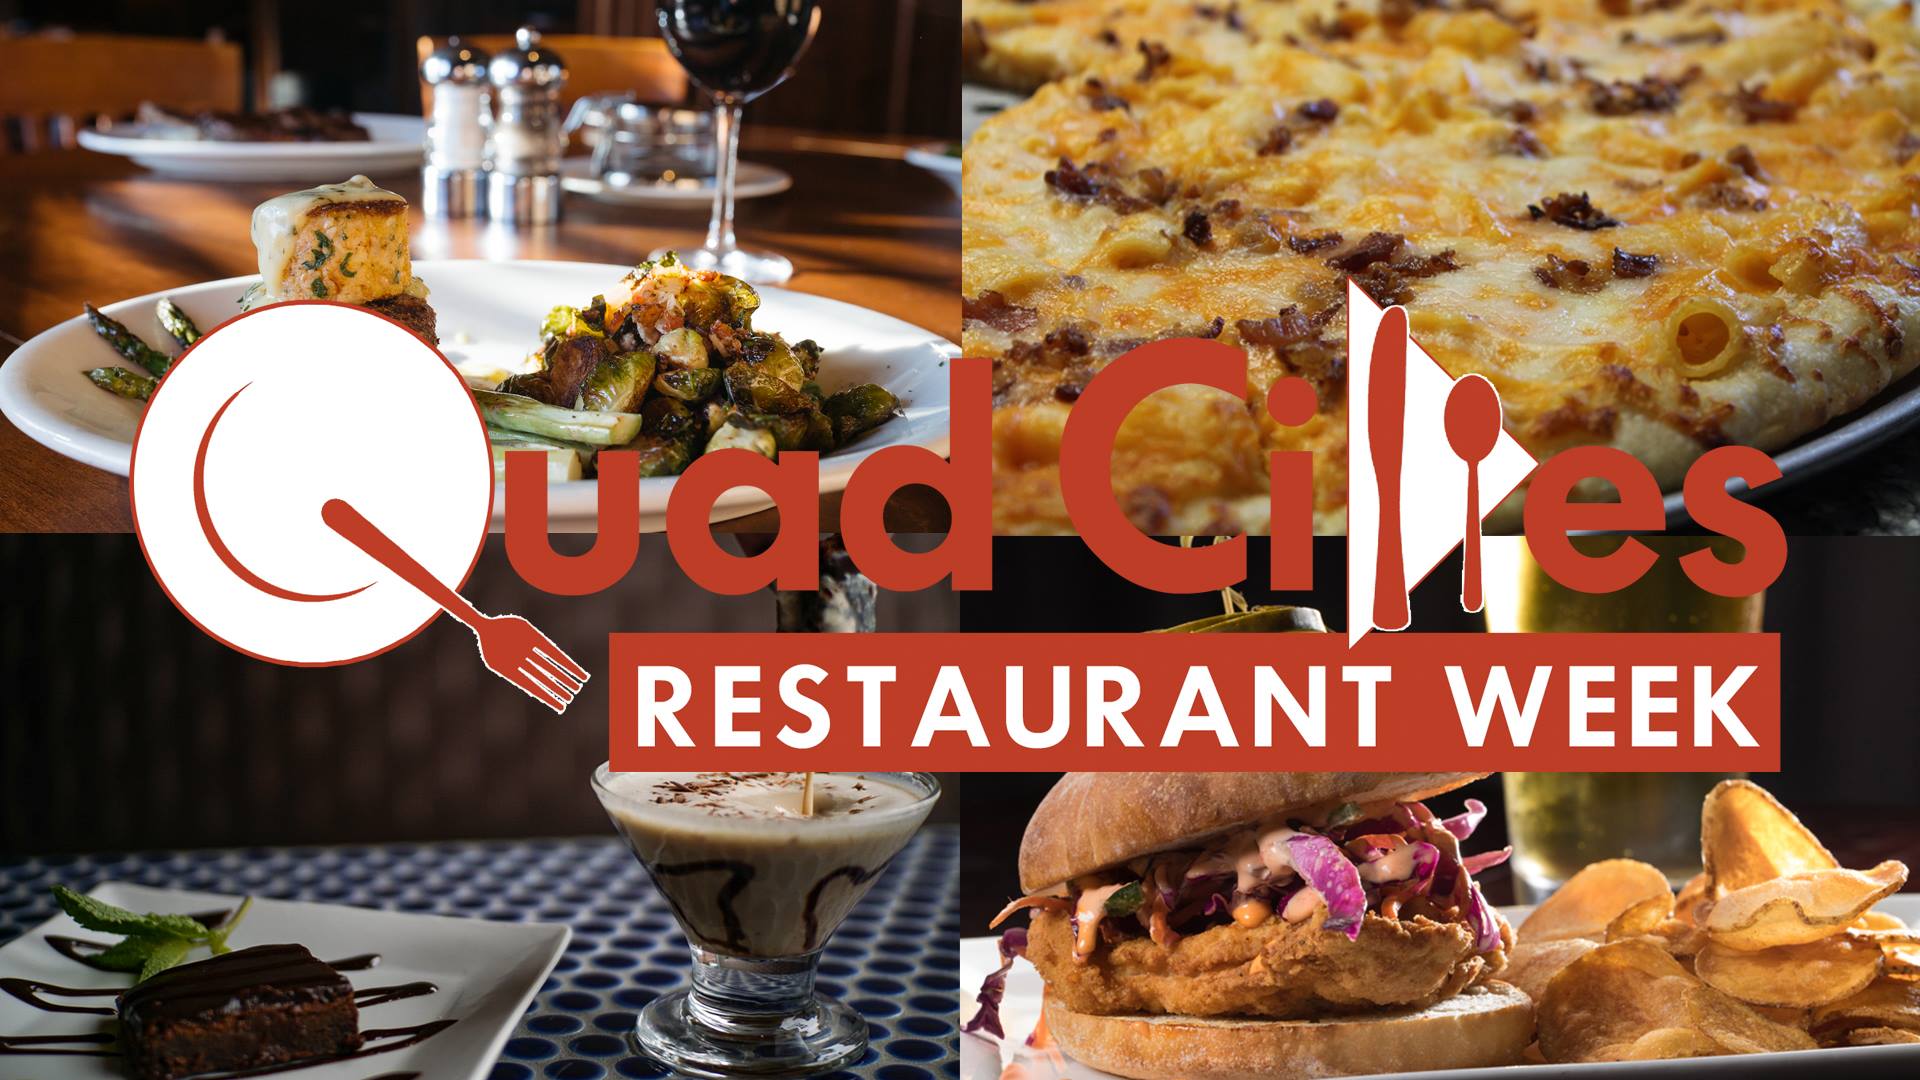 Restaurant Week Kicks Off Monday in the Quad Cities! | Quad Cities